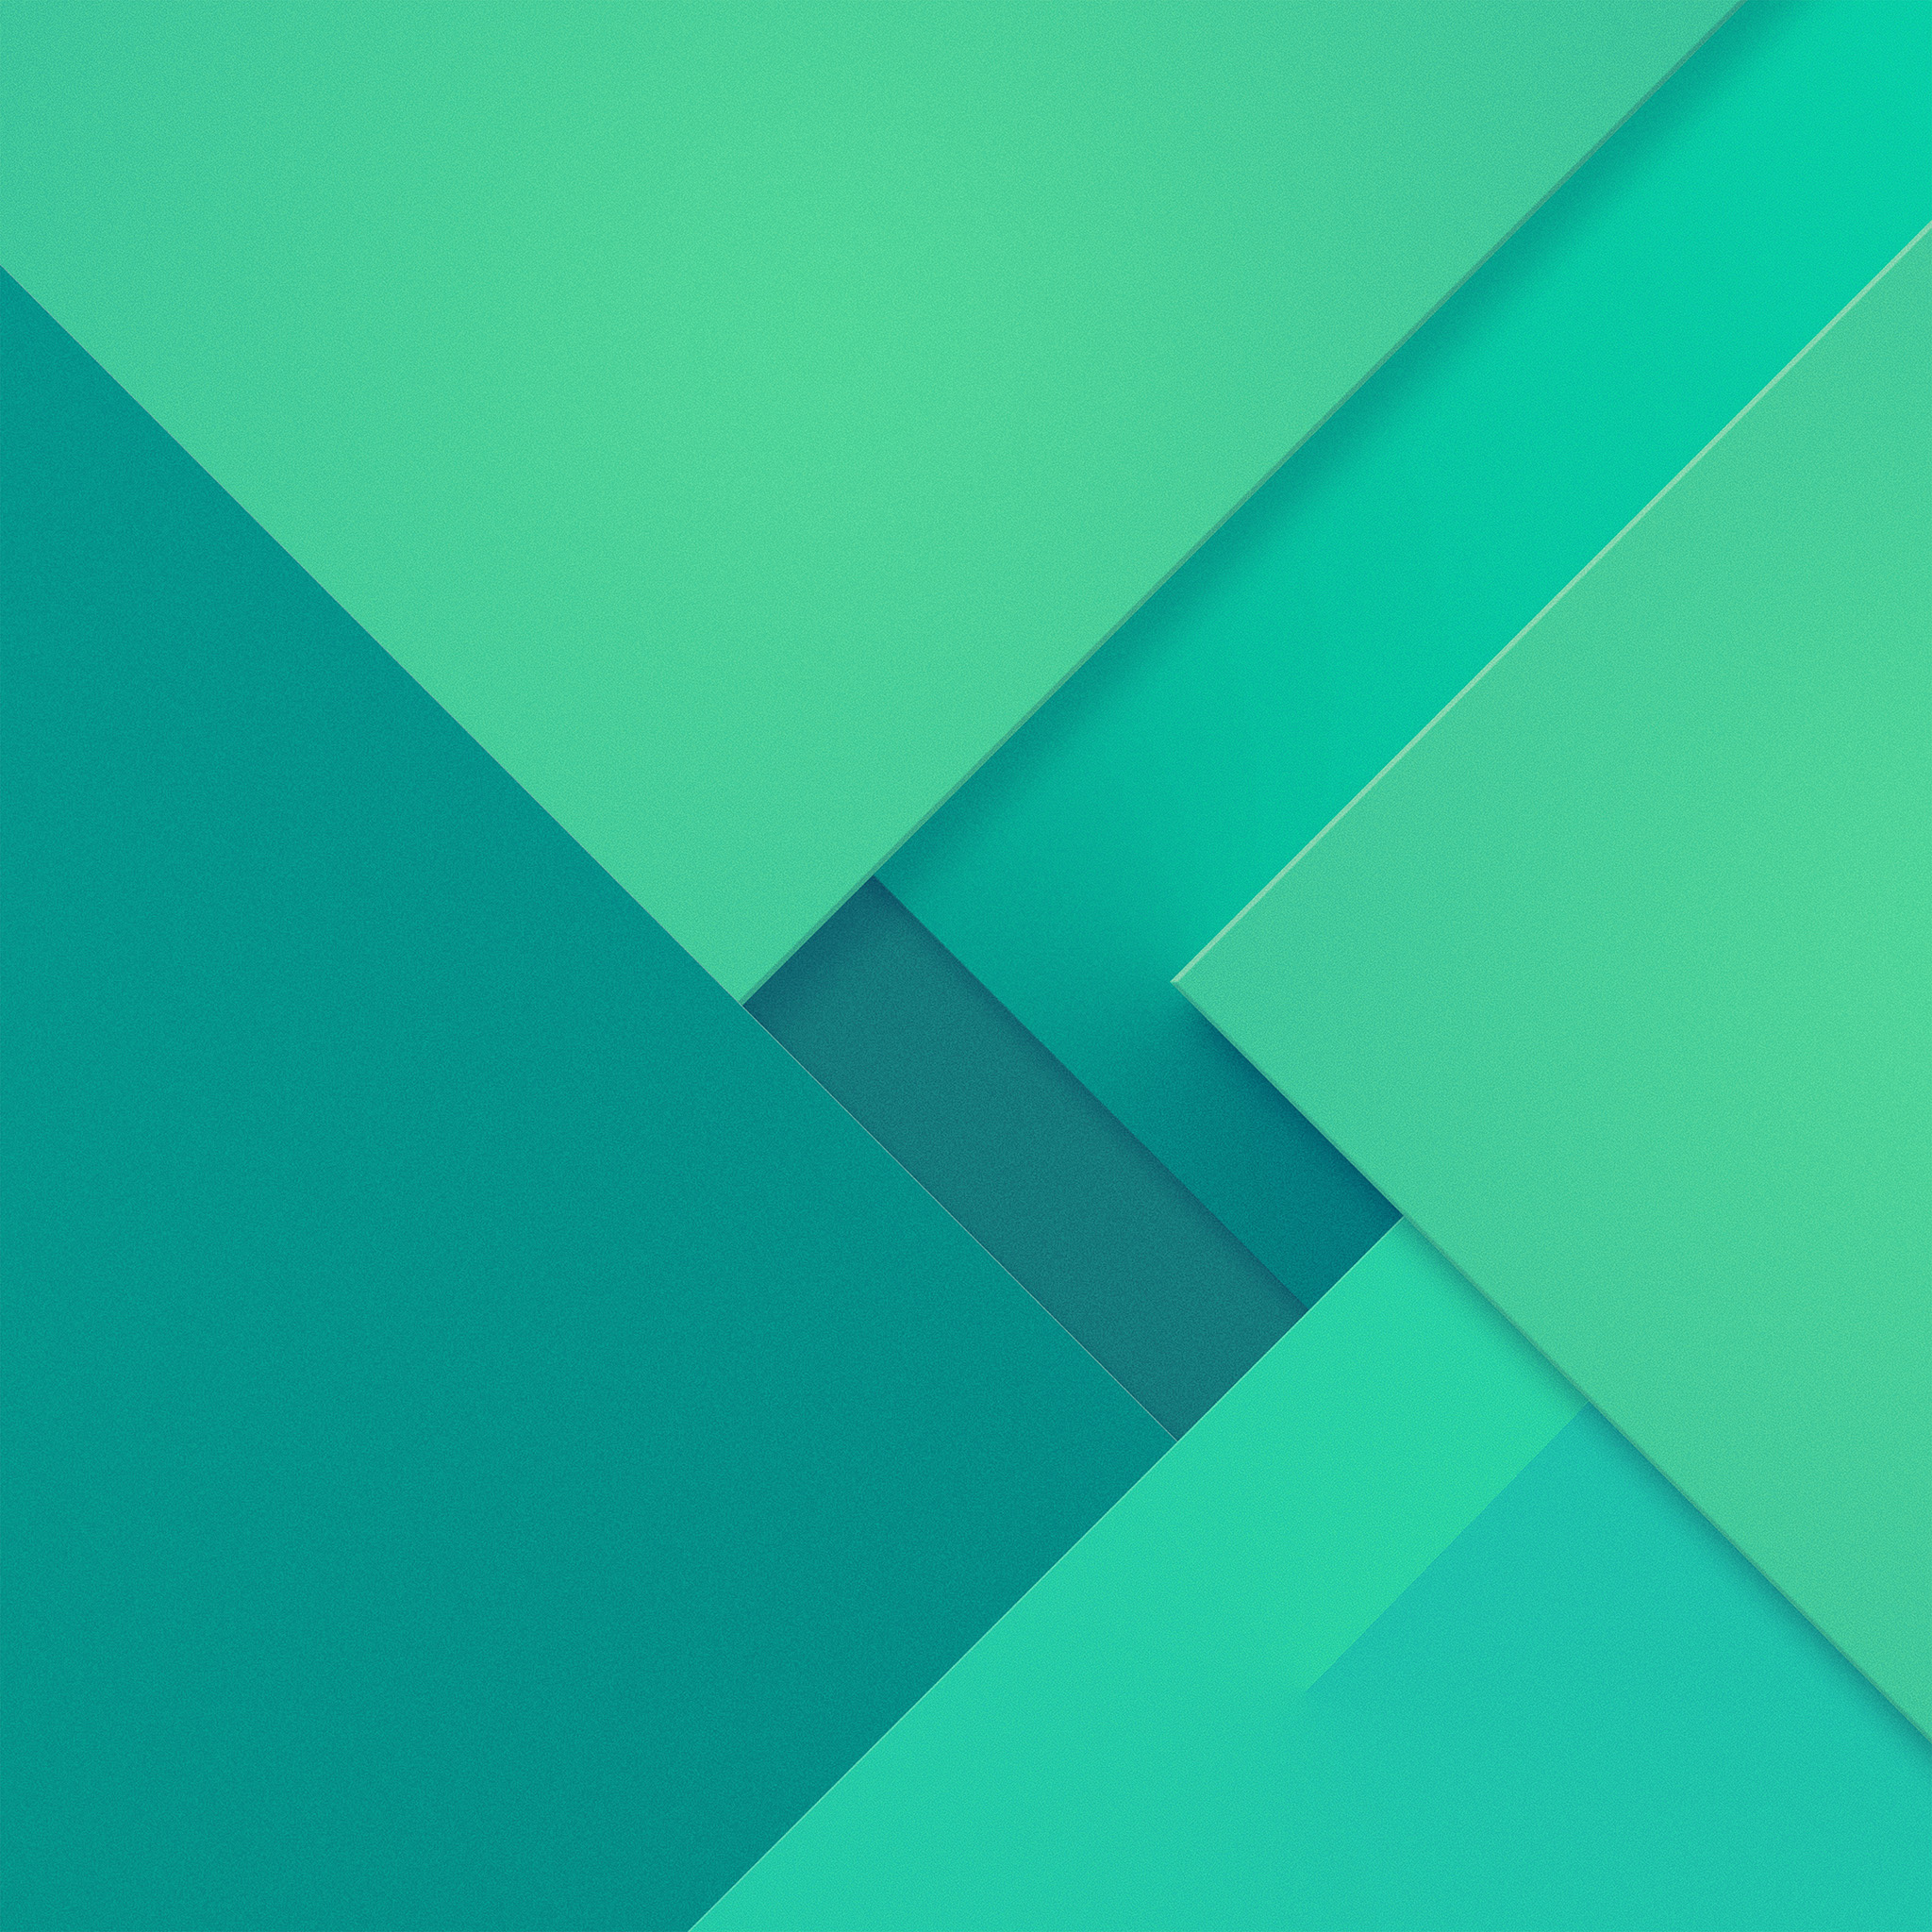 Green And Blue Abstract - HD Wallpaper 